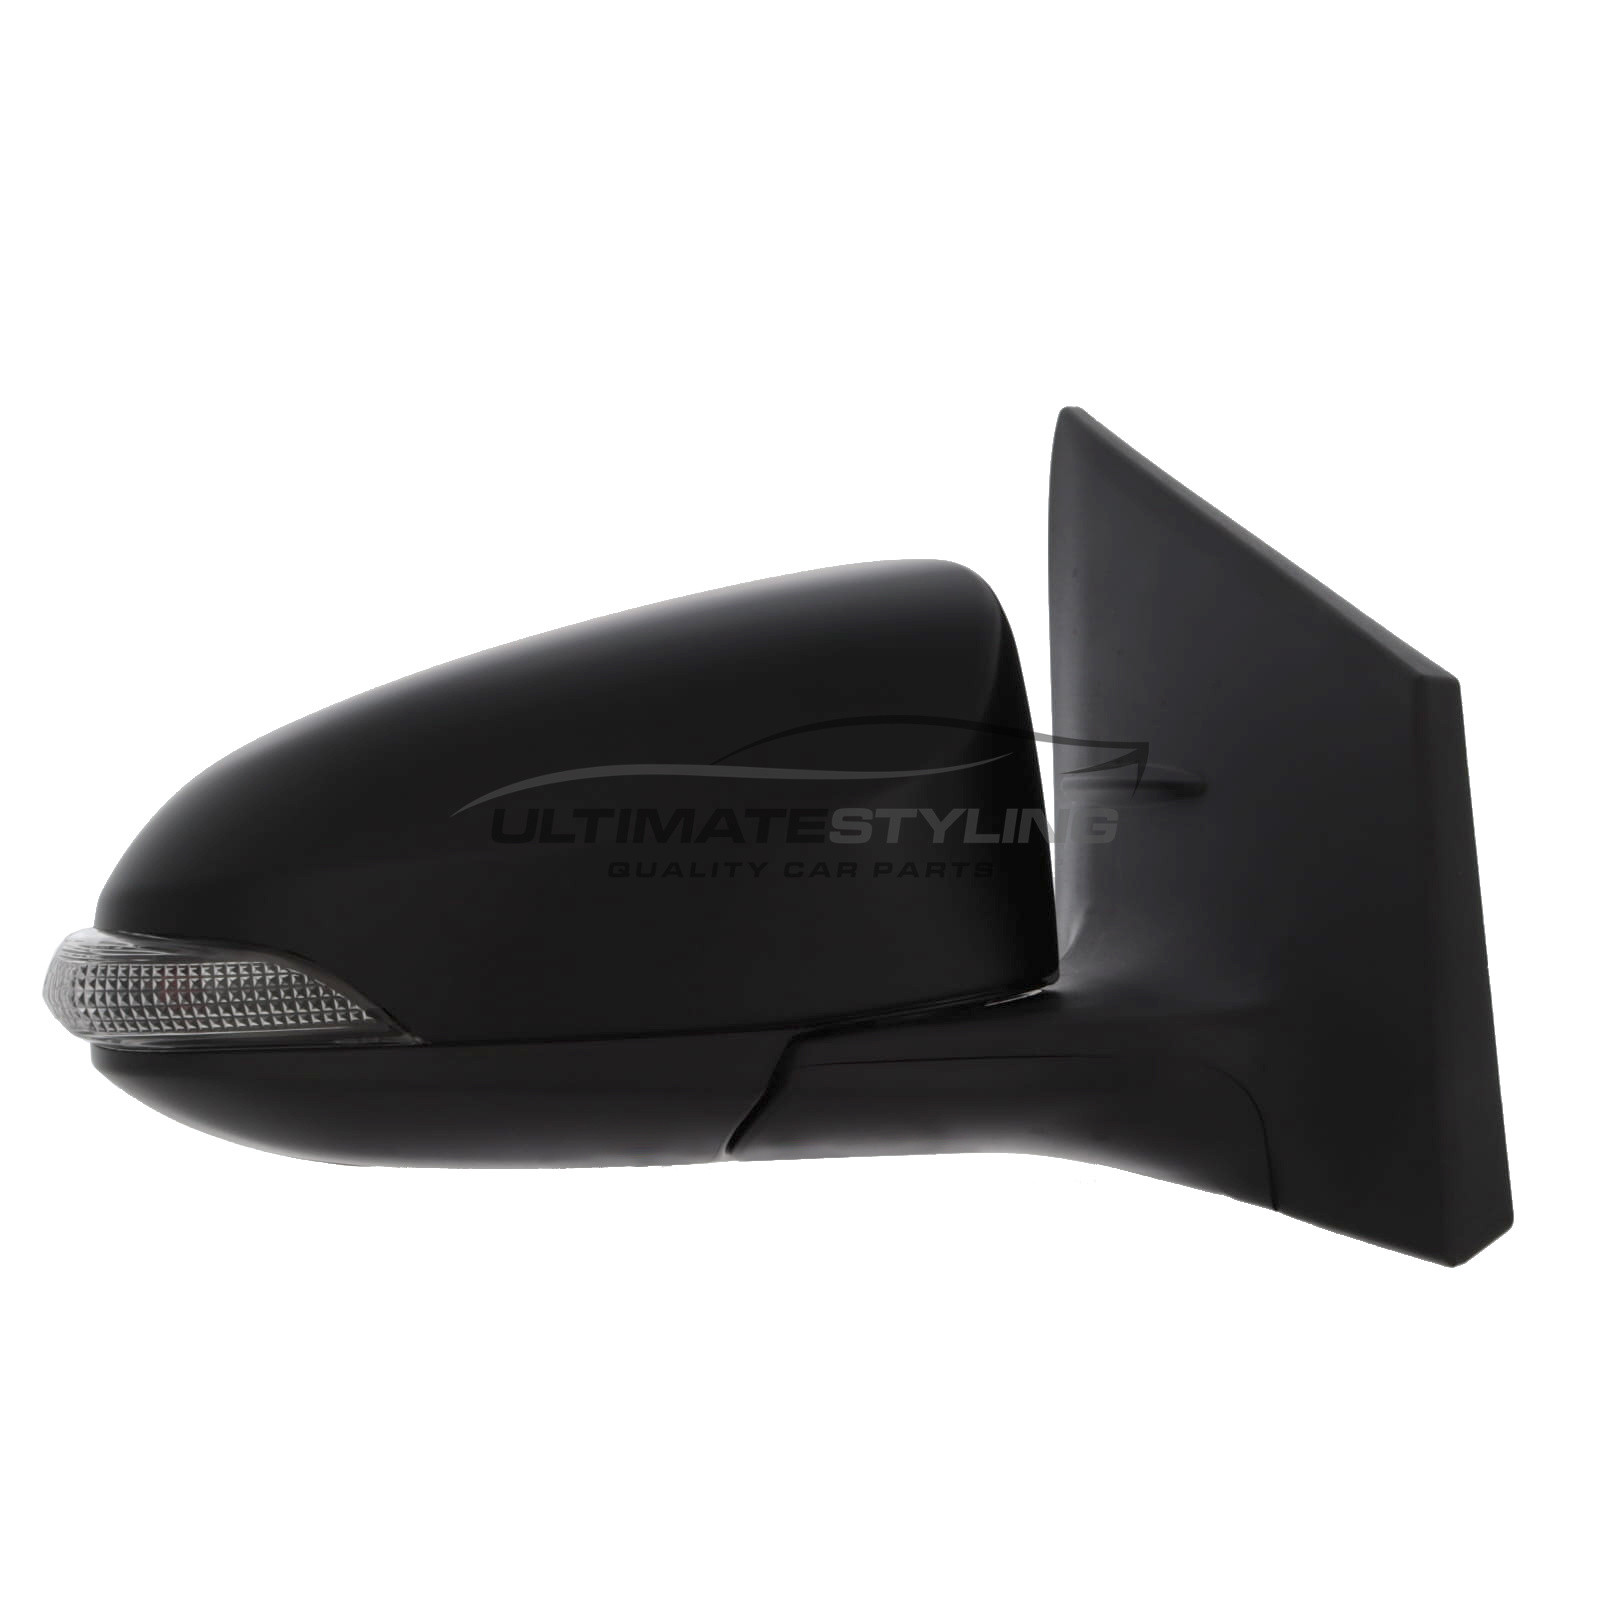 Toyota Auris Wing Mirror / Door Mirror - Drivers Side (RH) - Electric adjustment - Heated Glass - Power Folding - Indicator - Paintable - Black